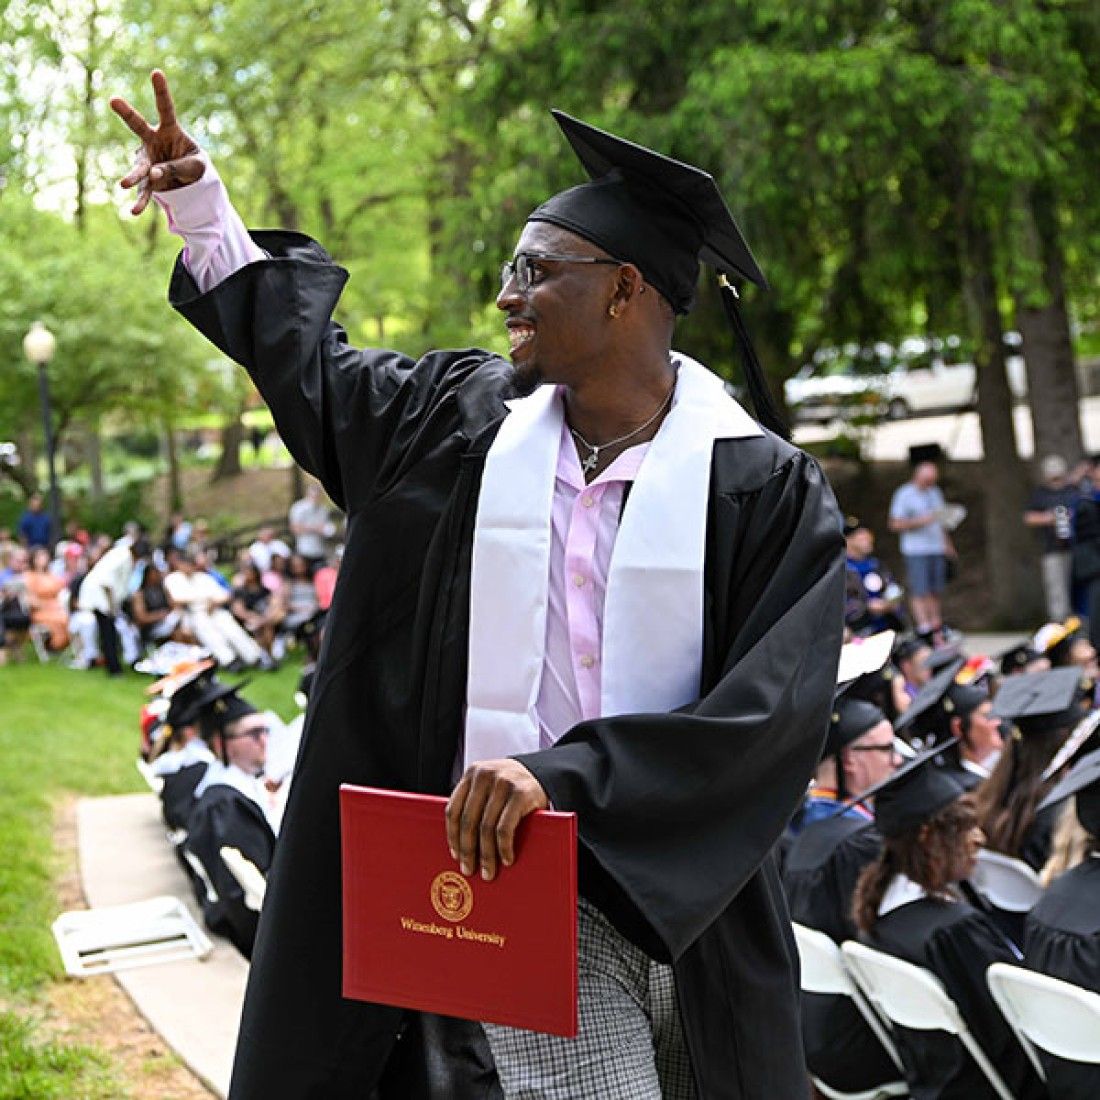 Wittenberg Student at Commencement